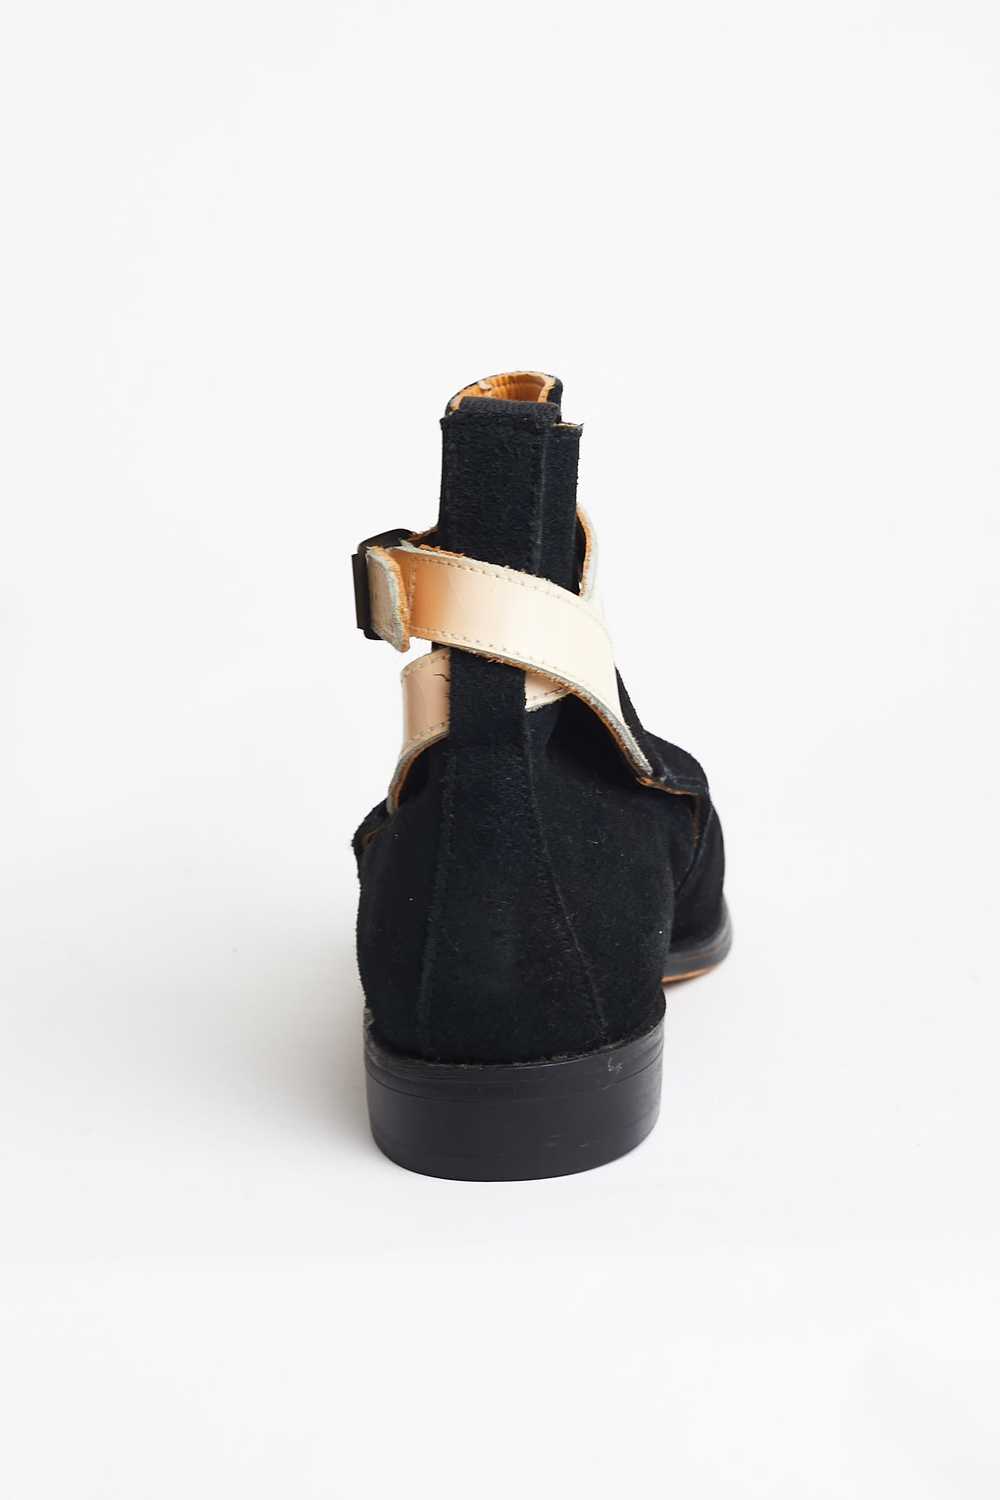 Vivienne Westwood 70's Sex suede Pirate boots - image 5